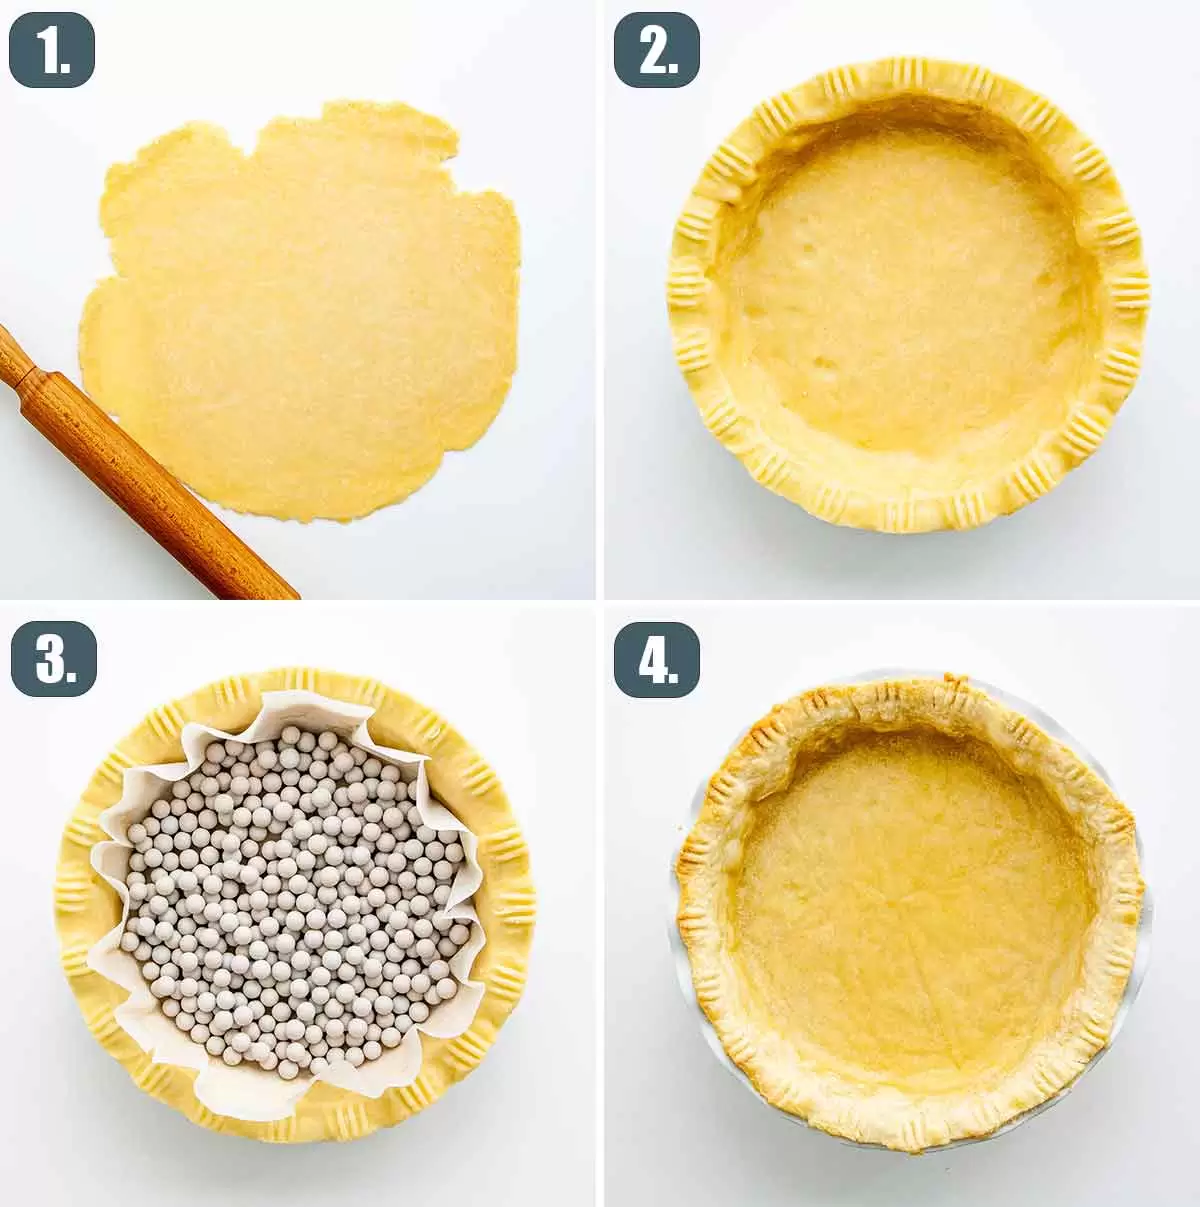 process shots showing how to prepare pie crust.